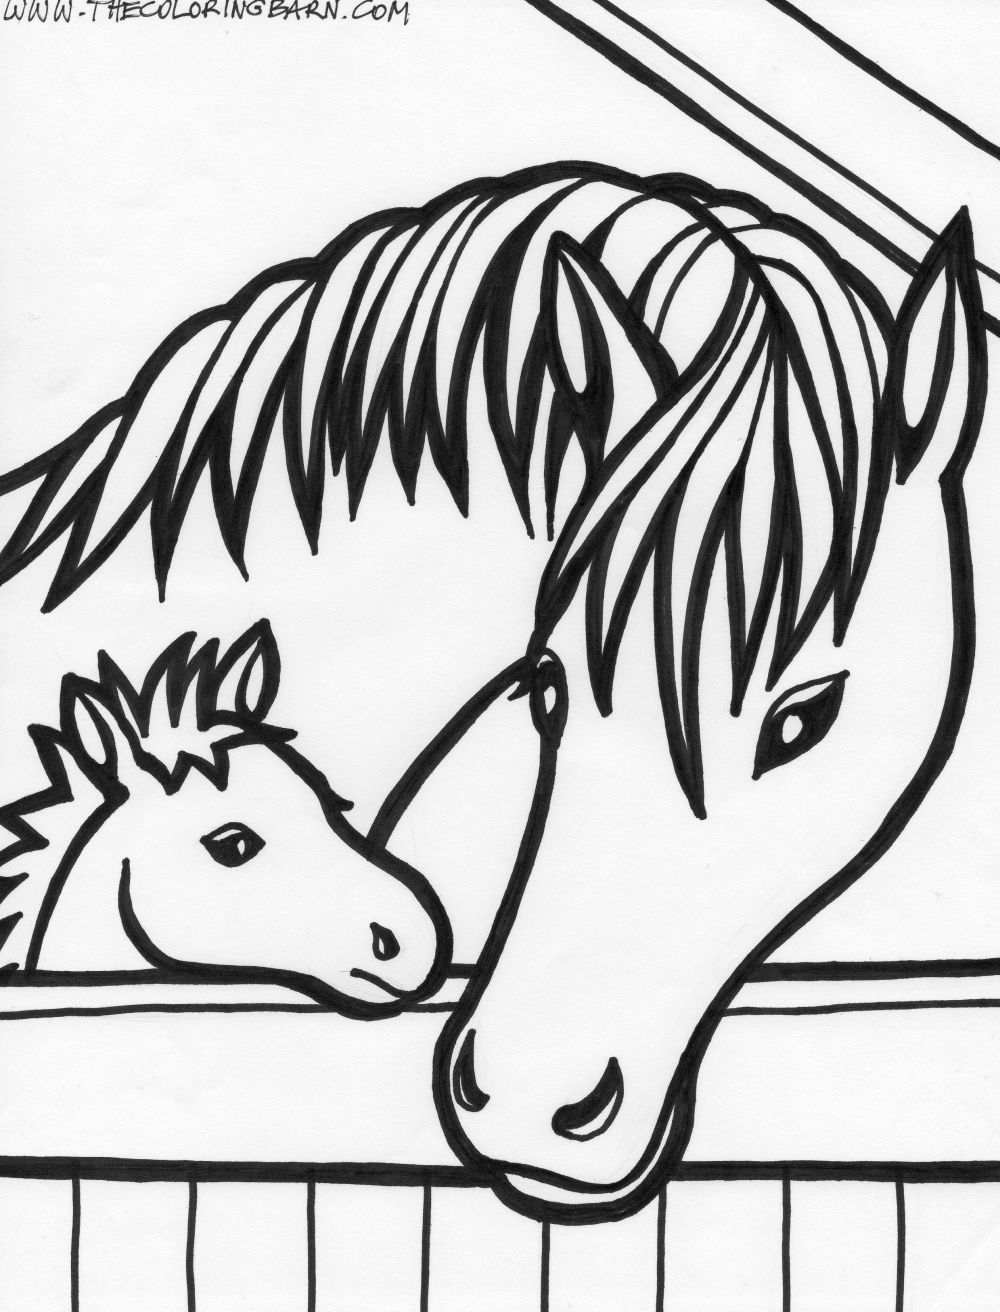 Coloring Pages Baby Animals